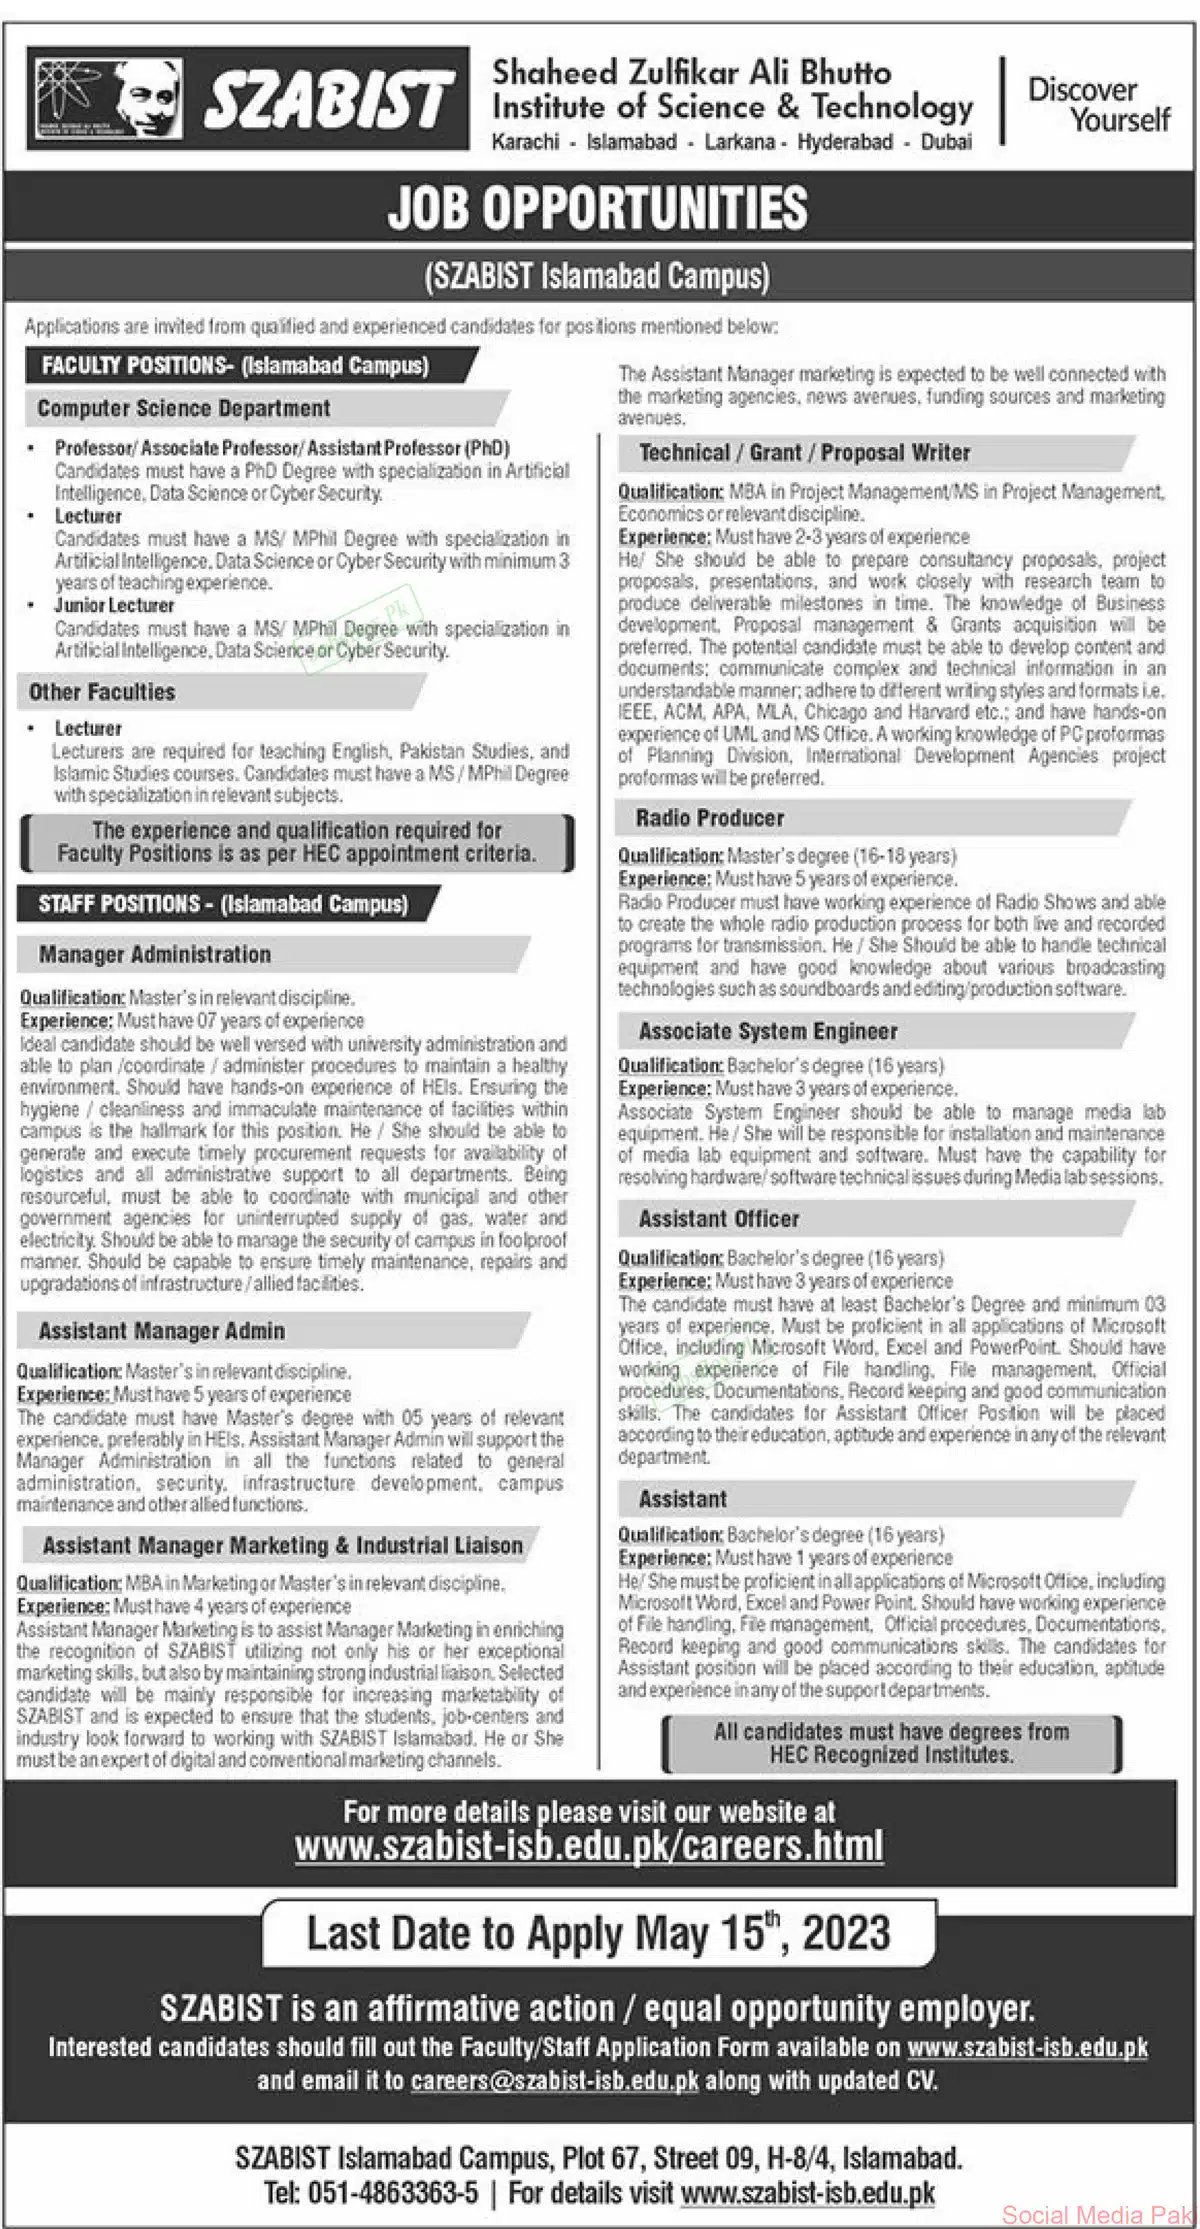 SZABIST Jobs 2023 at Islamabad Campus - Download Application Form